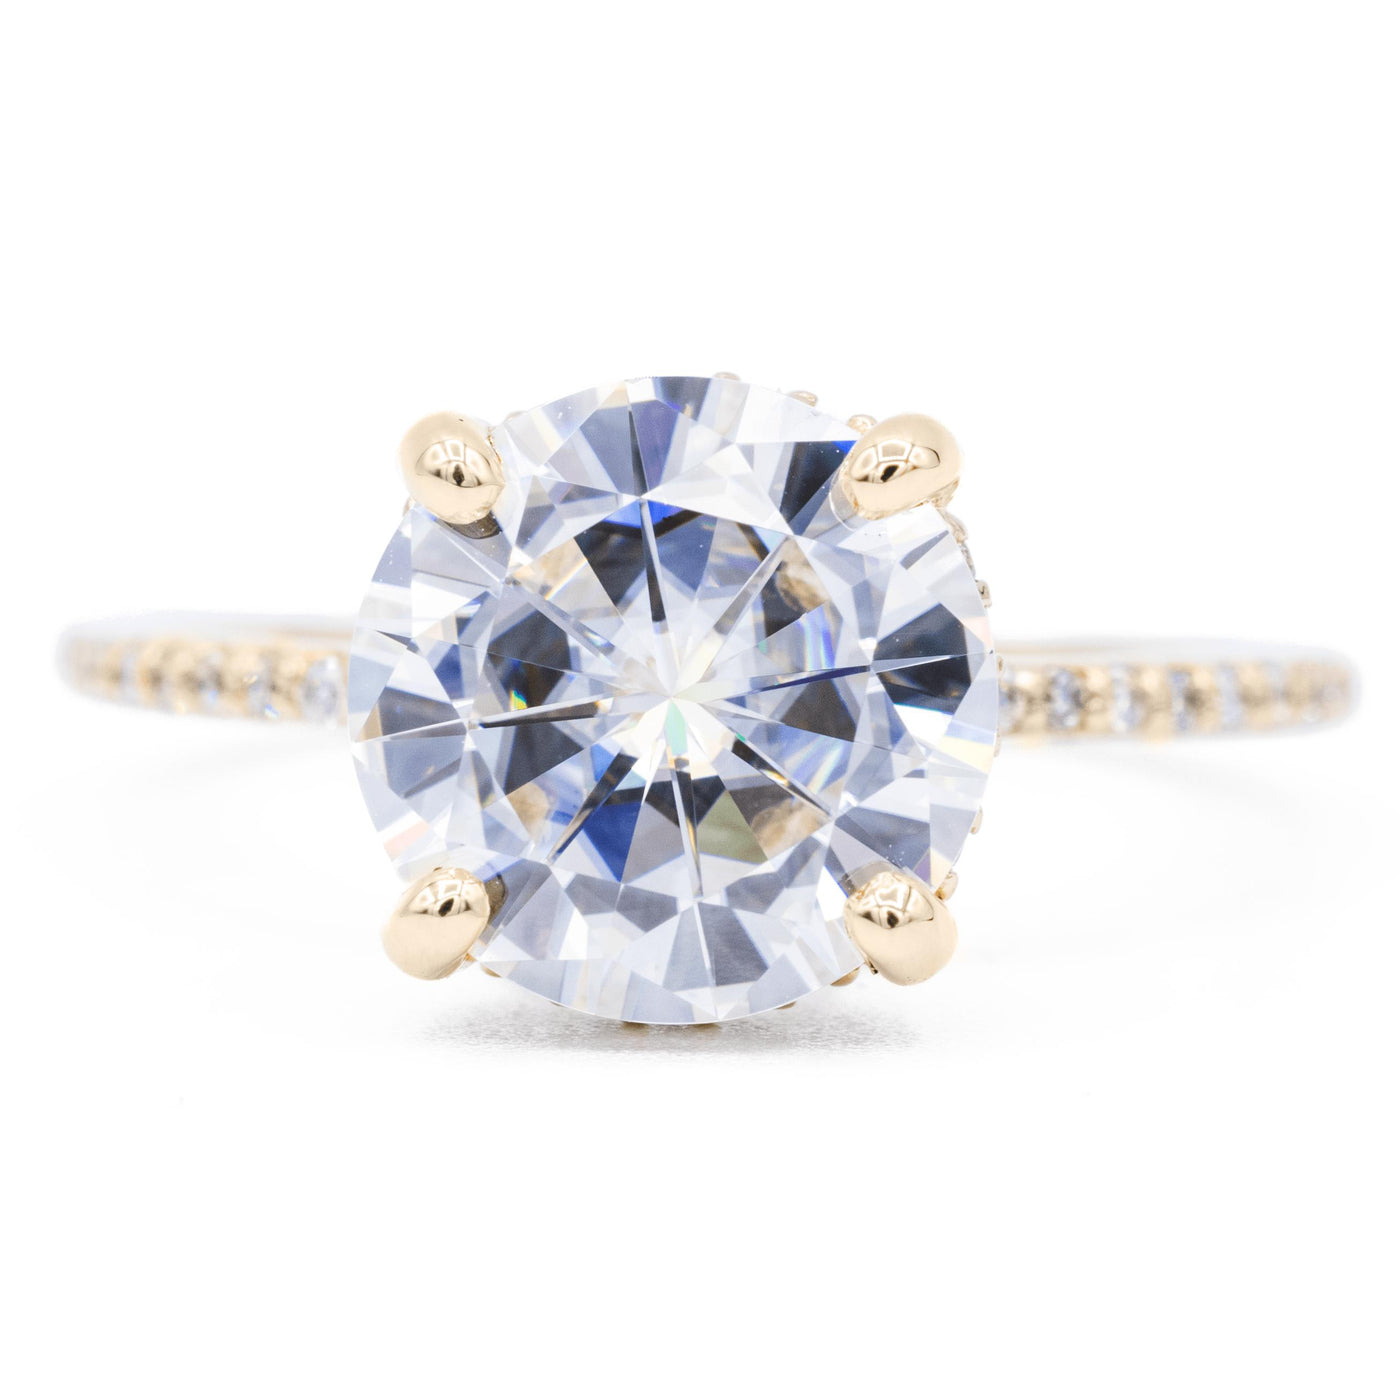 8mm Round Moissanite 14K Yellow Gold Diamond Upper Gallery and Shoulder Ring-Fire & Brilliance ® Creative Designs-Fire & Brilliance ®